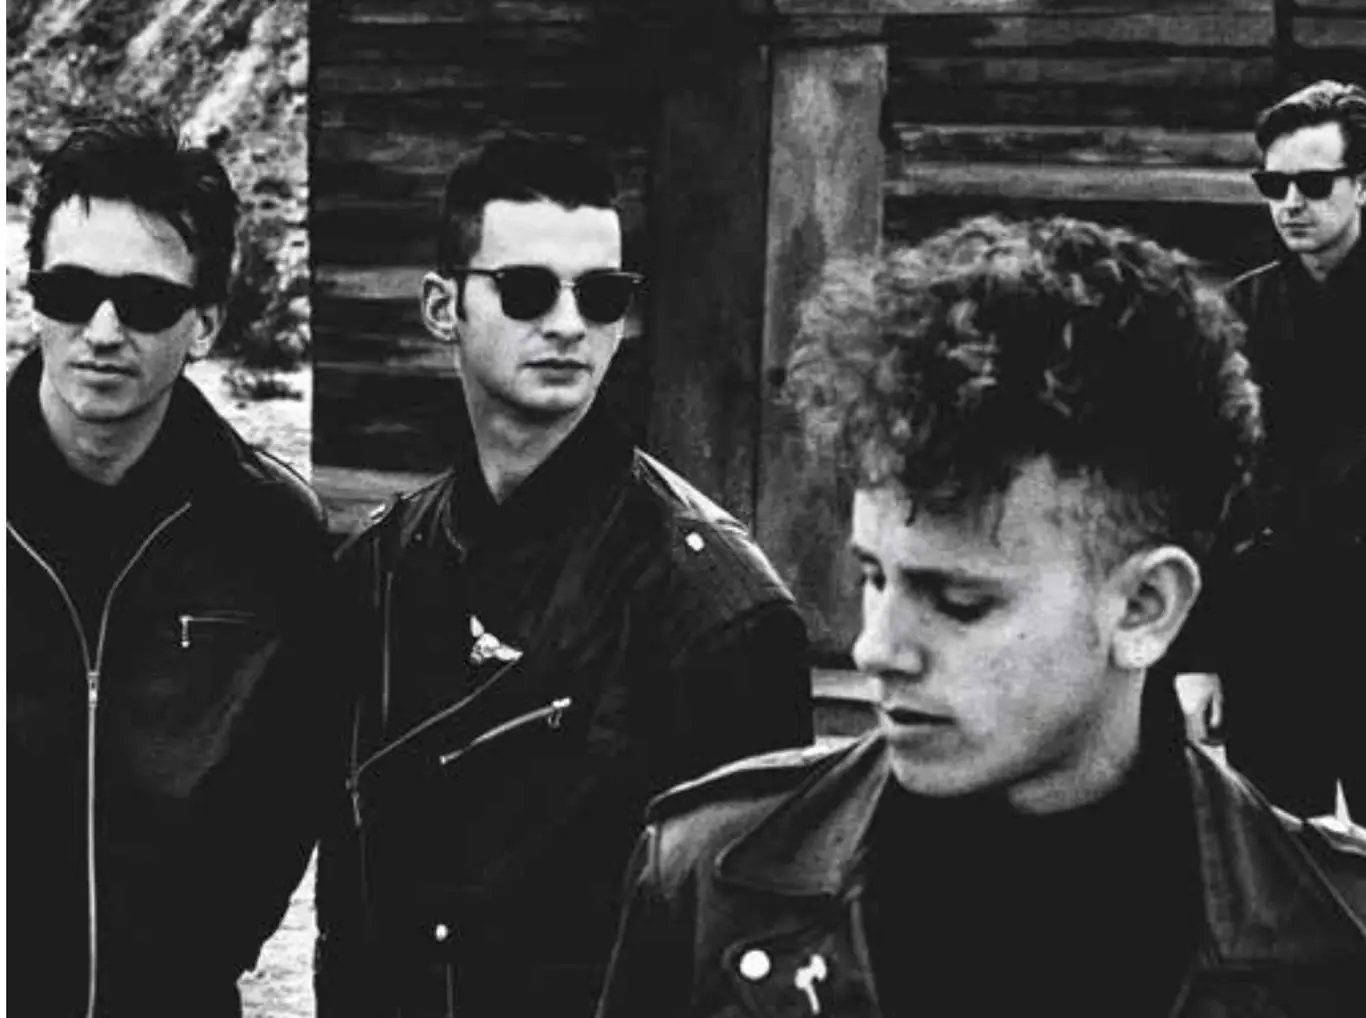 DEPECHE MODE announce iconic film collection ‘Strange/Strange Too’ to be released on DVD/Blu-ray for the first time